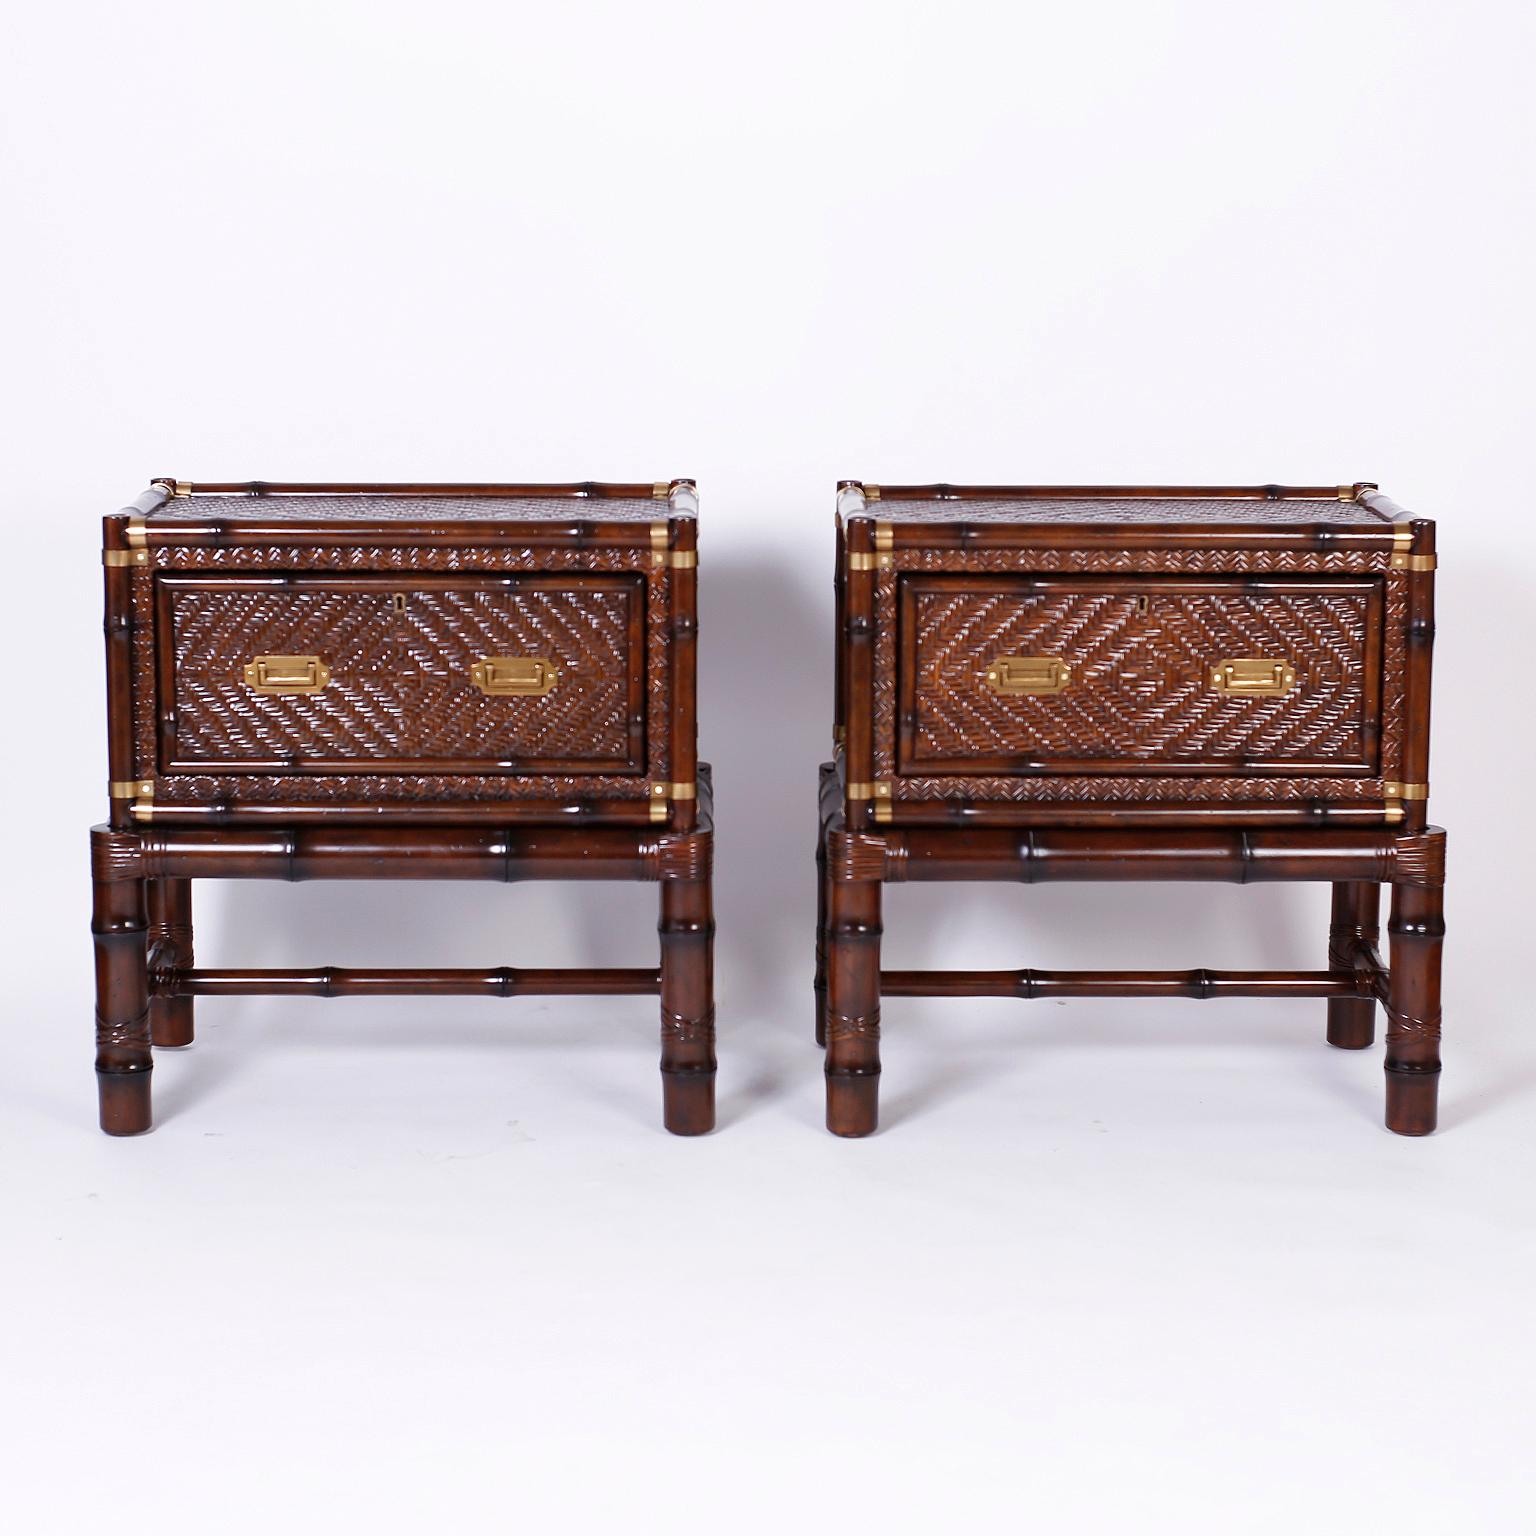 Pair of campaign style one drawer chests on stands or tables with faux bamboo frames, herringbone rattan panels, and brass campaign style hardware. Signed Ralph Lauren in a drawer.